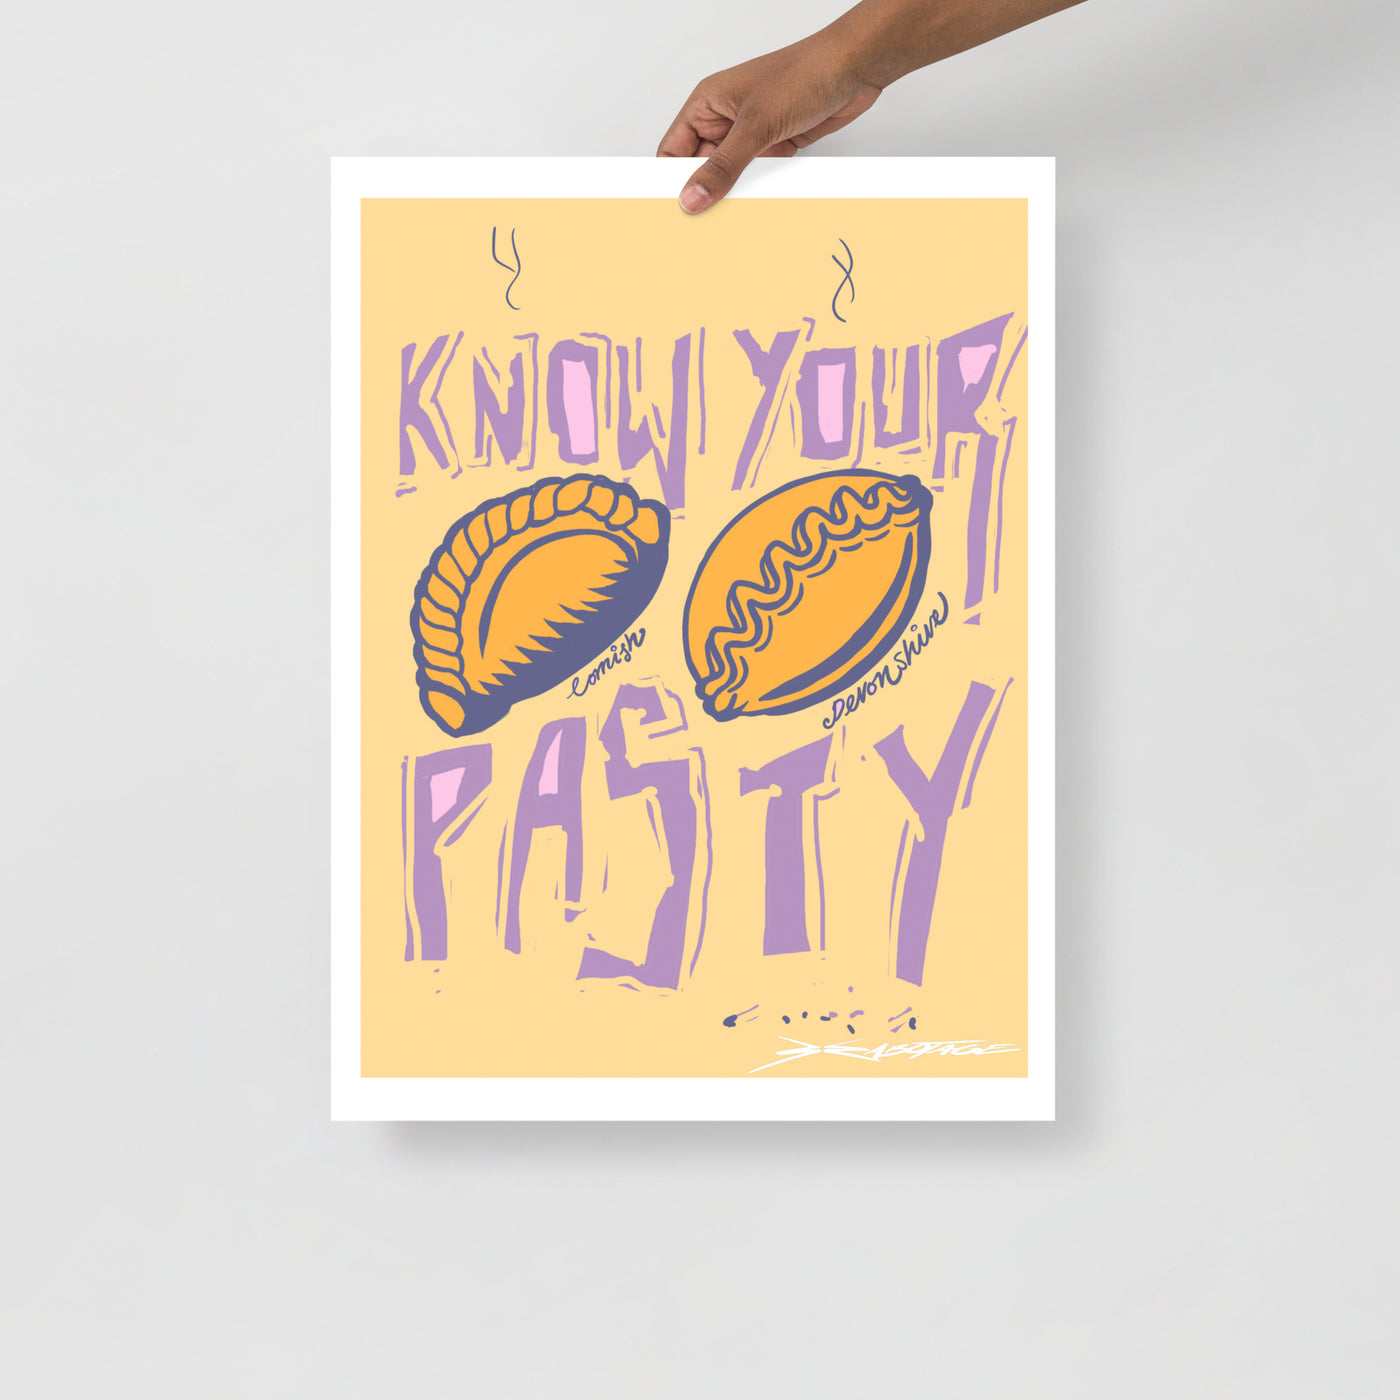 Know your Pasty - Cream - Digital print - Crimped Quims Limited Collection